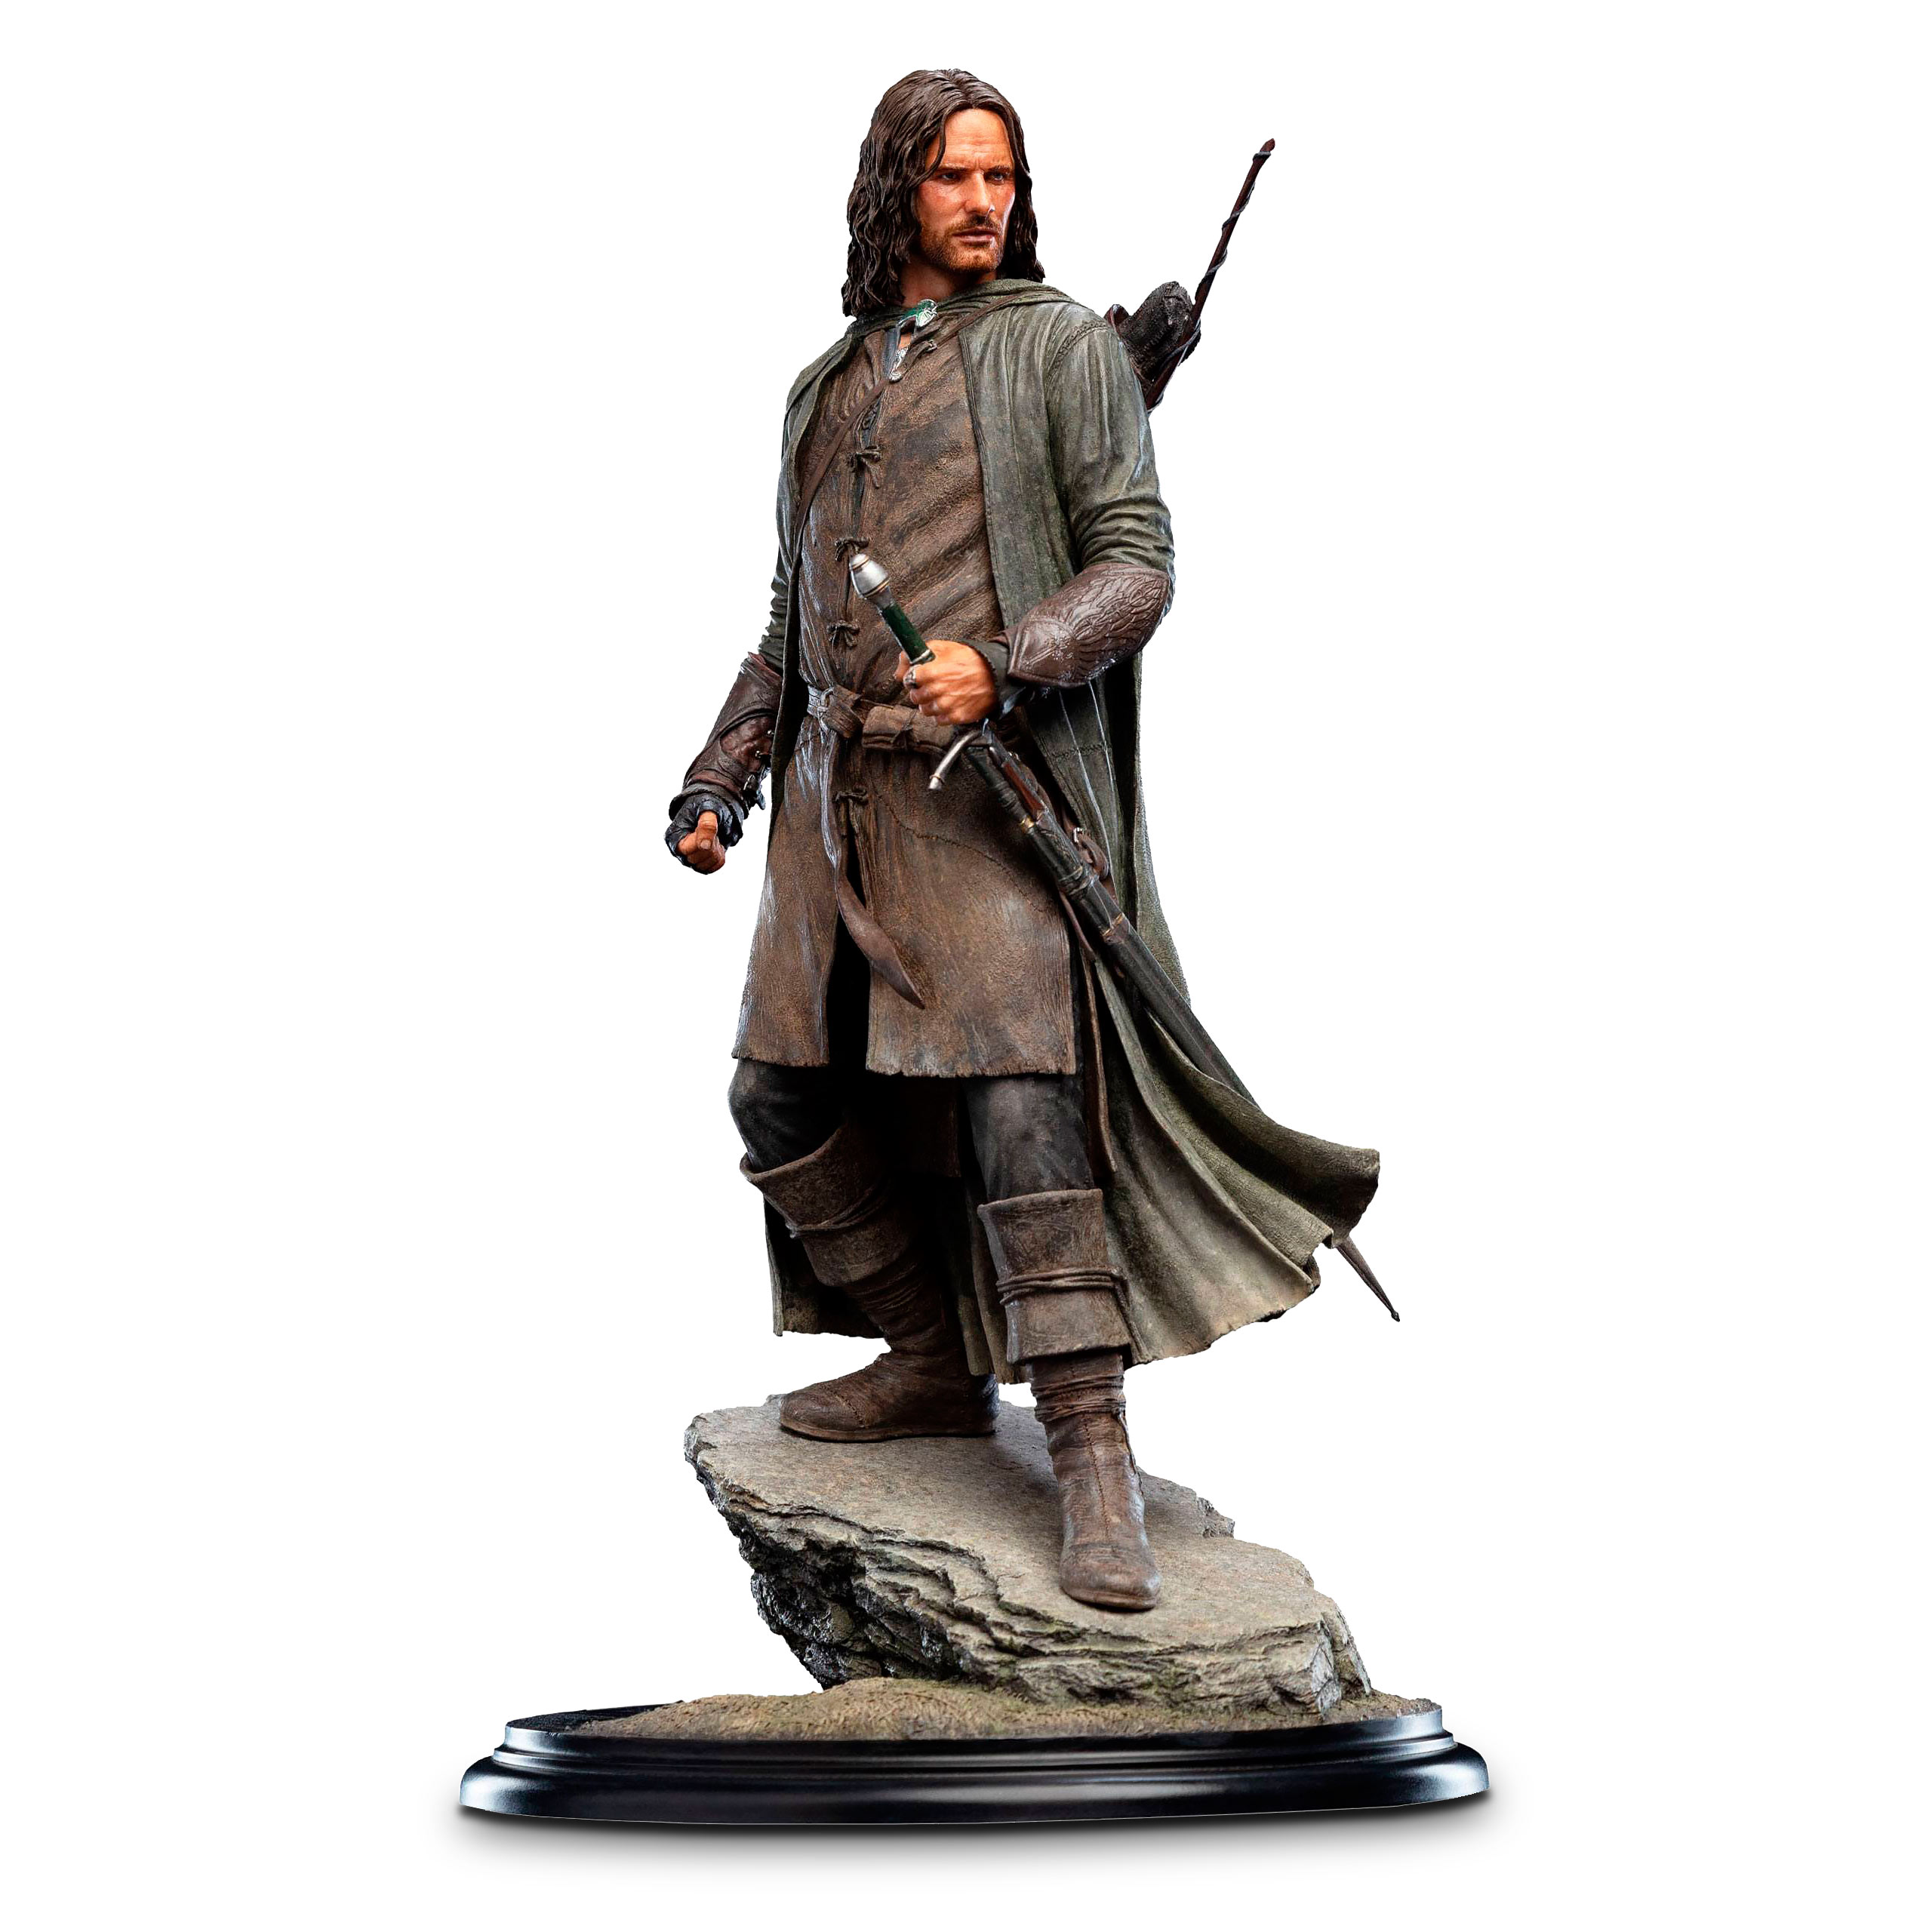 Lord of the Rings - Aragorn Deluxe Statue 1:6